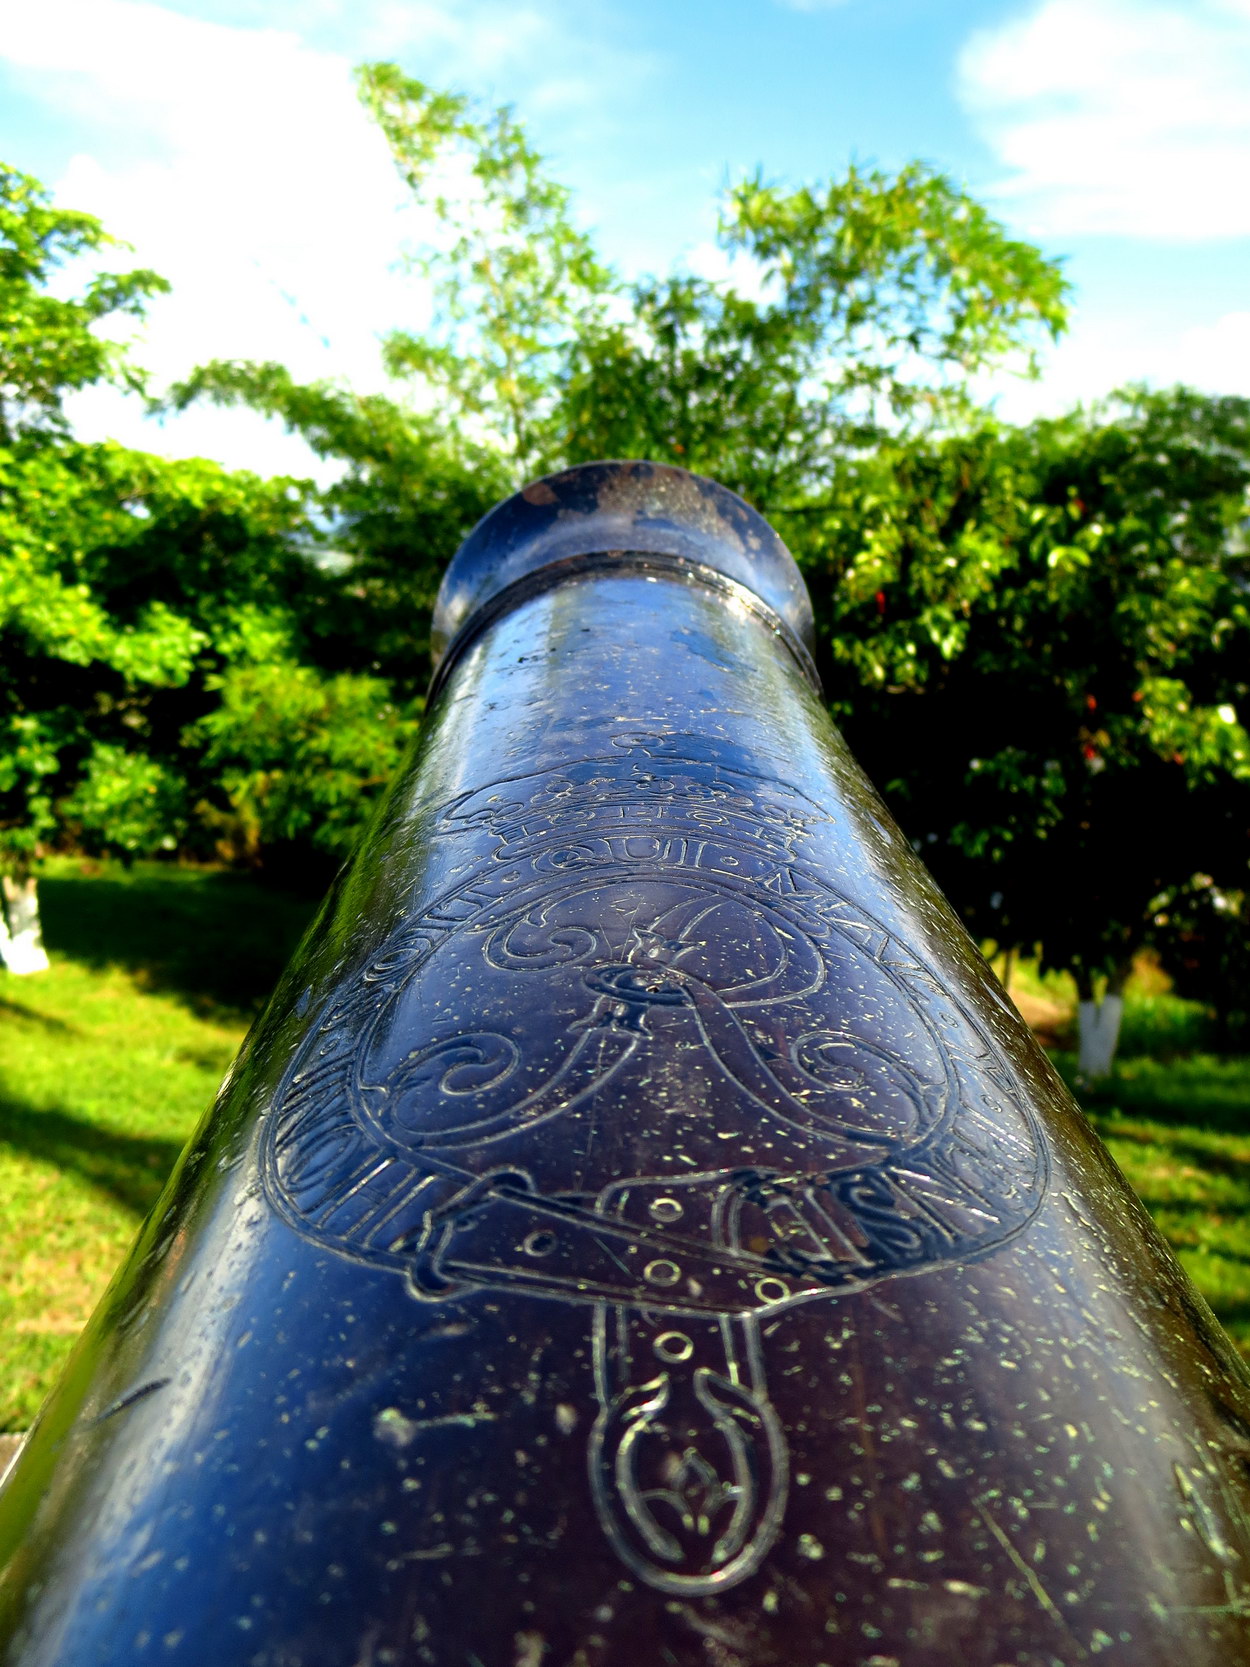 Details of a cannon at Fort Picton, Calvary Hill, Port of Spain. Photographer: Alana Joseph.